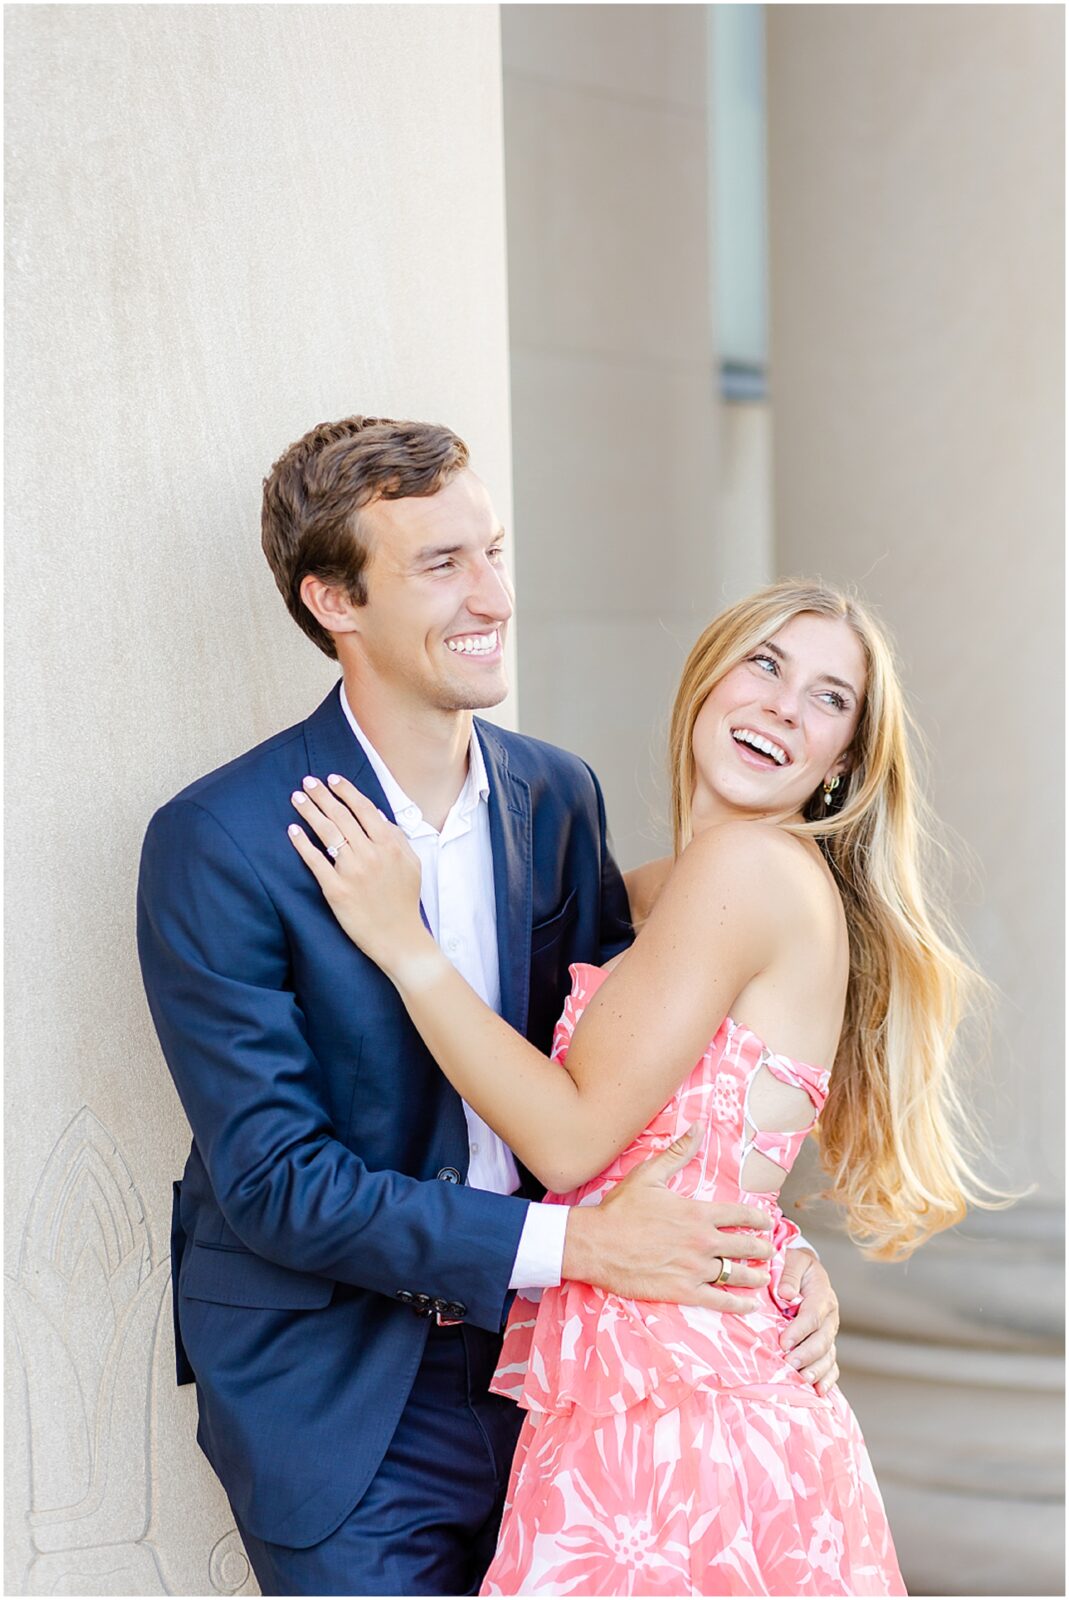 Engagement photos at the Kansas City Nelson Atkins Museum for Kate & Jake by Mariam Saifan Photography | KC Engagement Photos | What to Wear | Location Ideas | Grand Hall Wedding | 2024 Wedding Photographers 